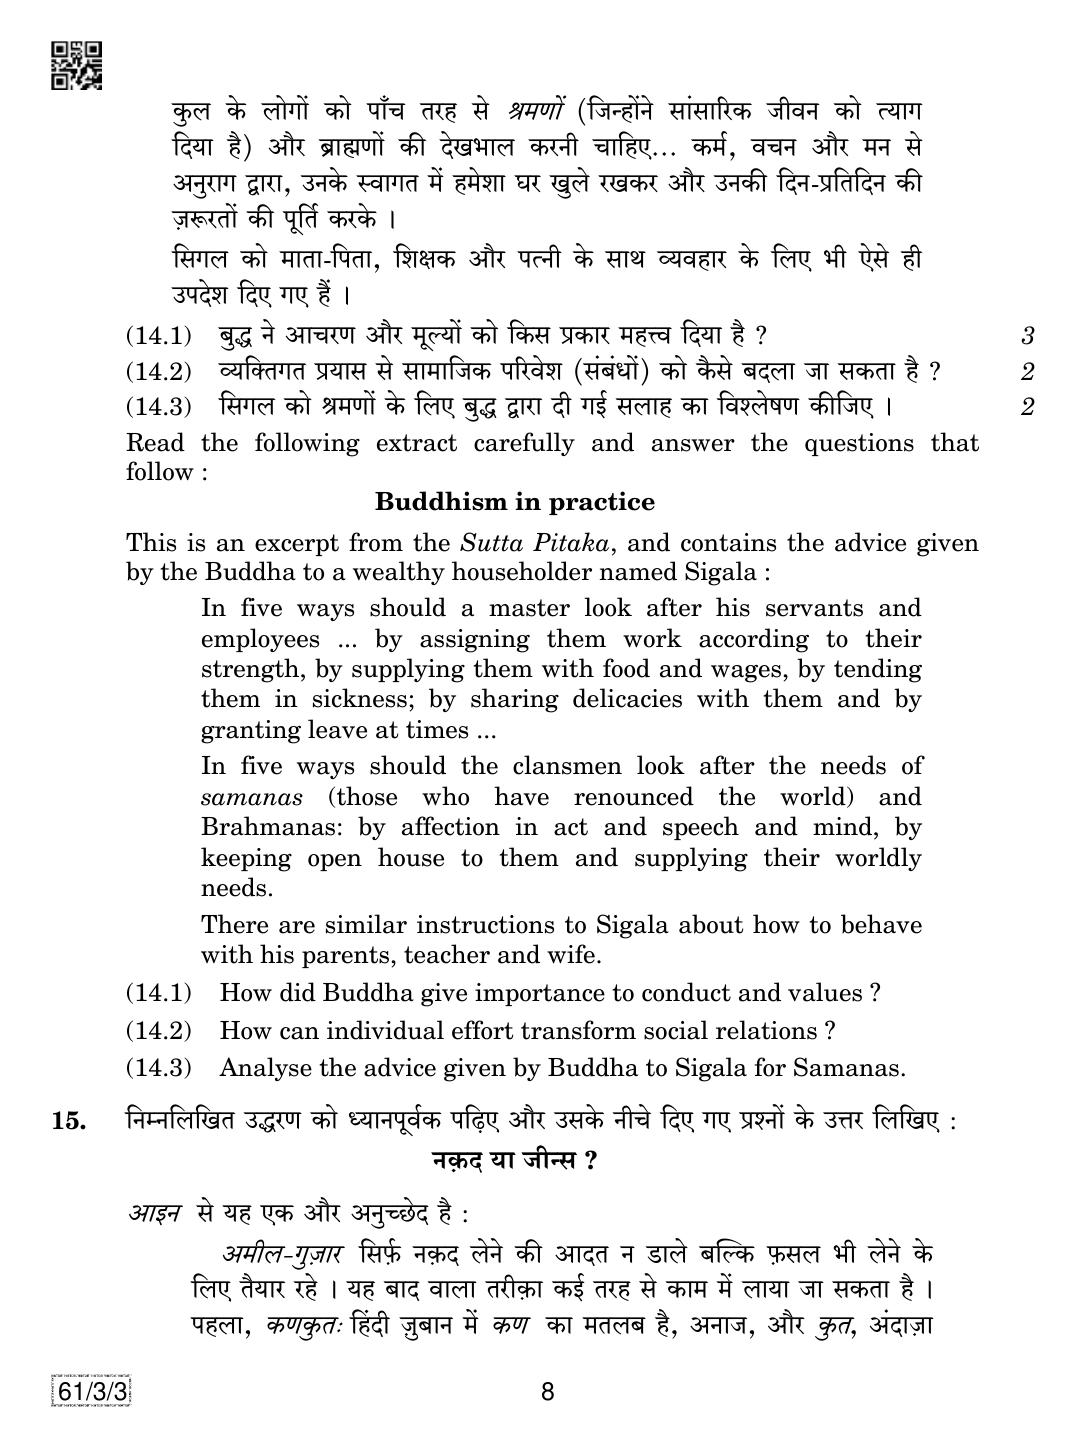 CBSE Class 12 61-3-3 History 2019 Question Paper - Page 8